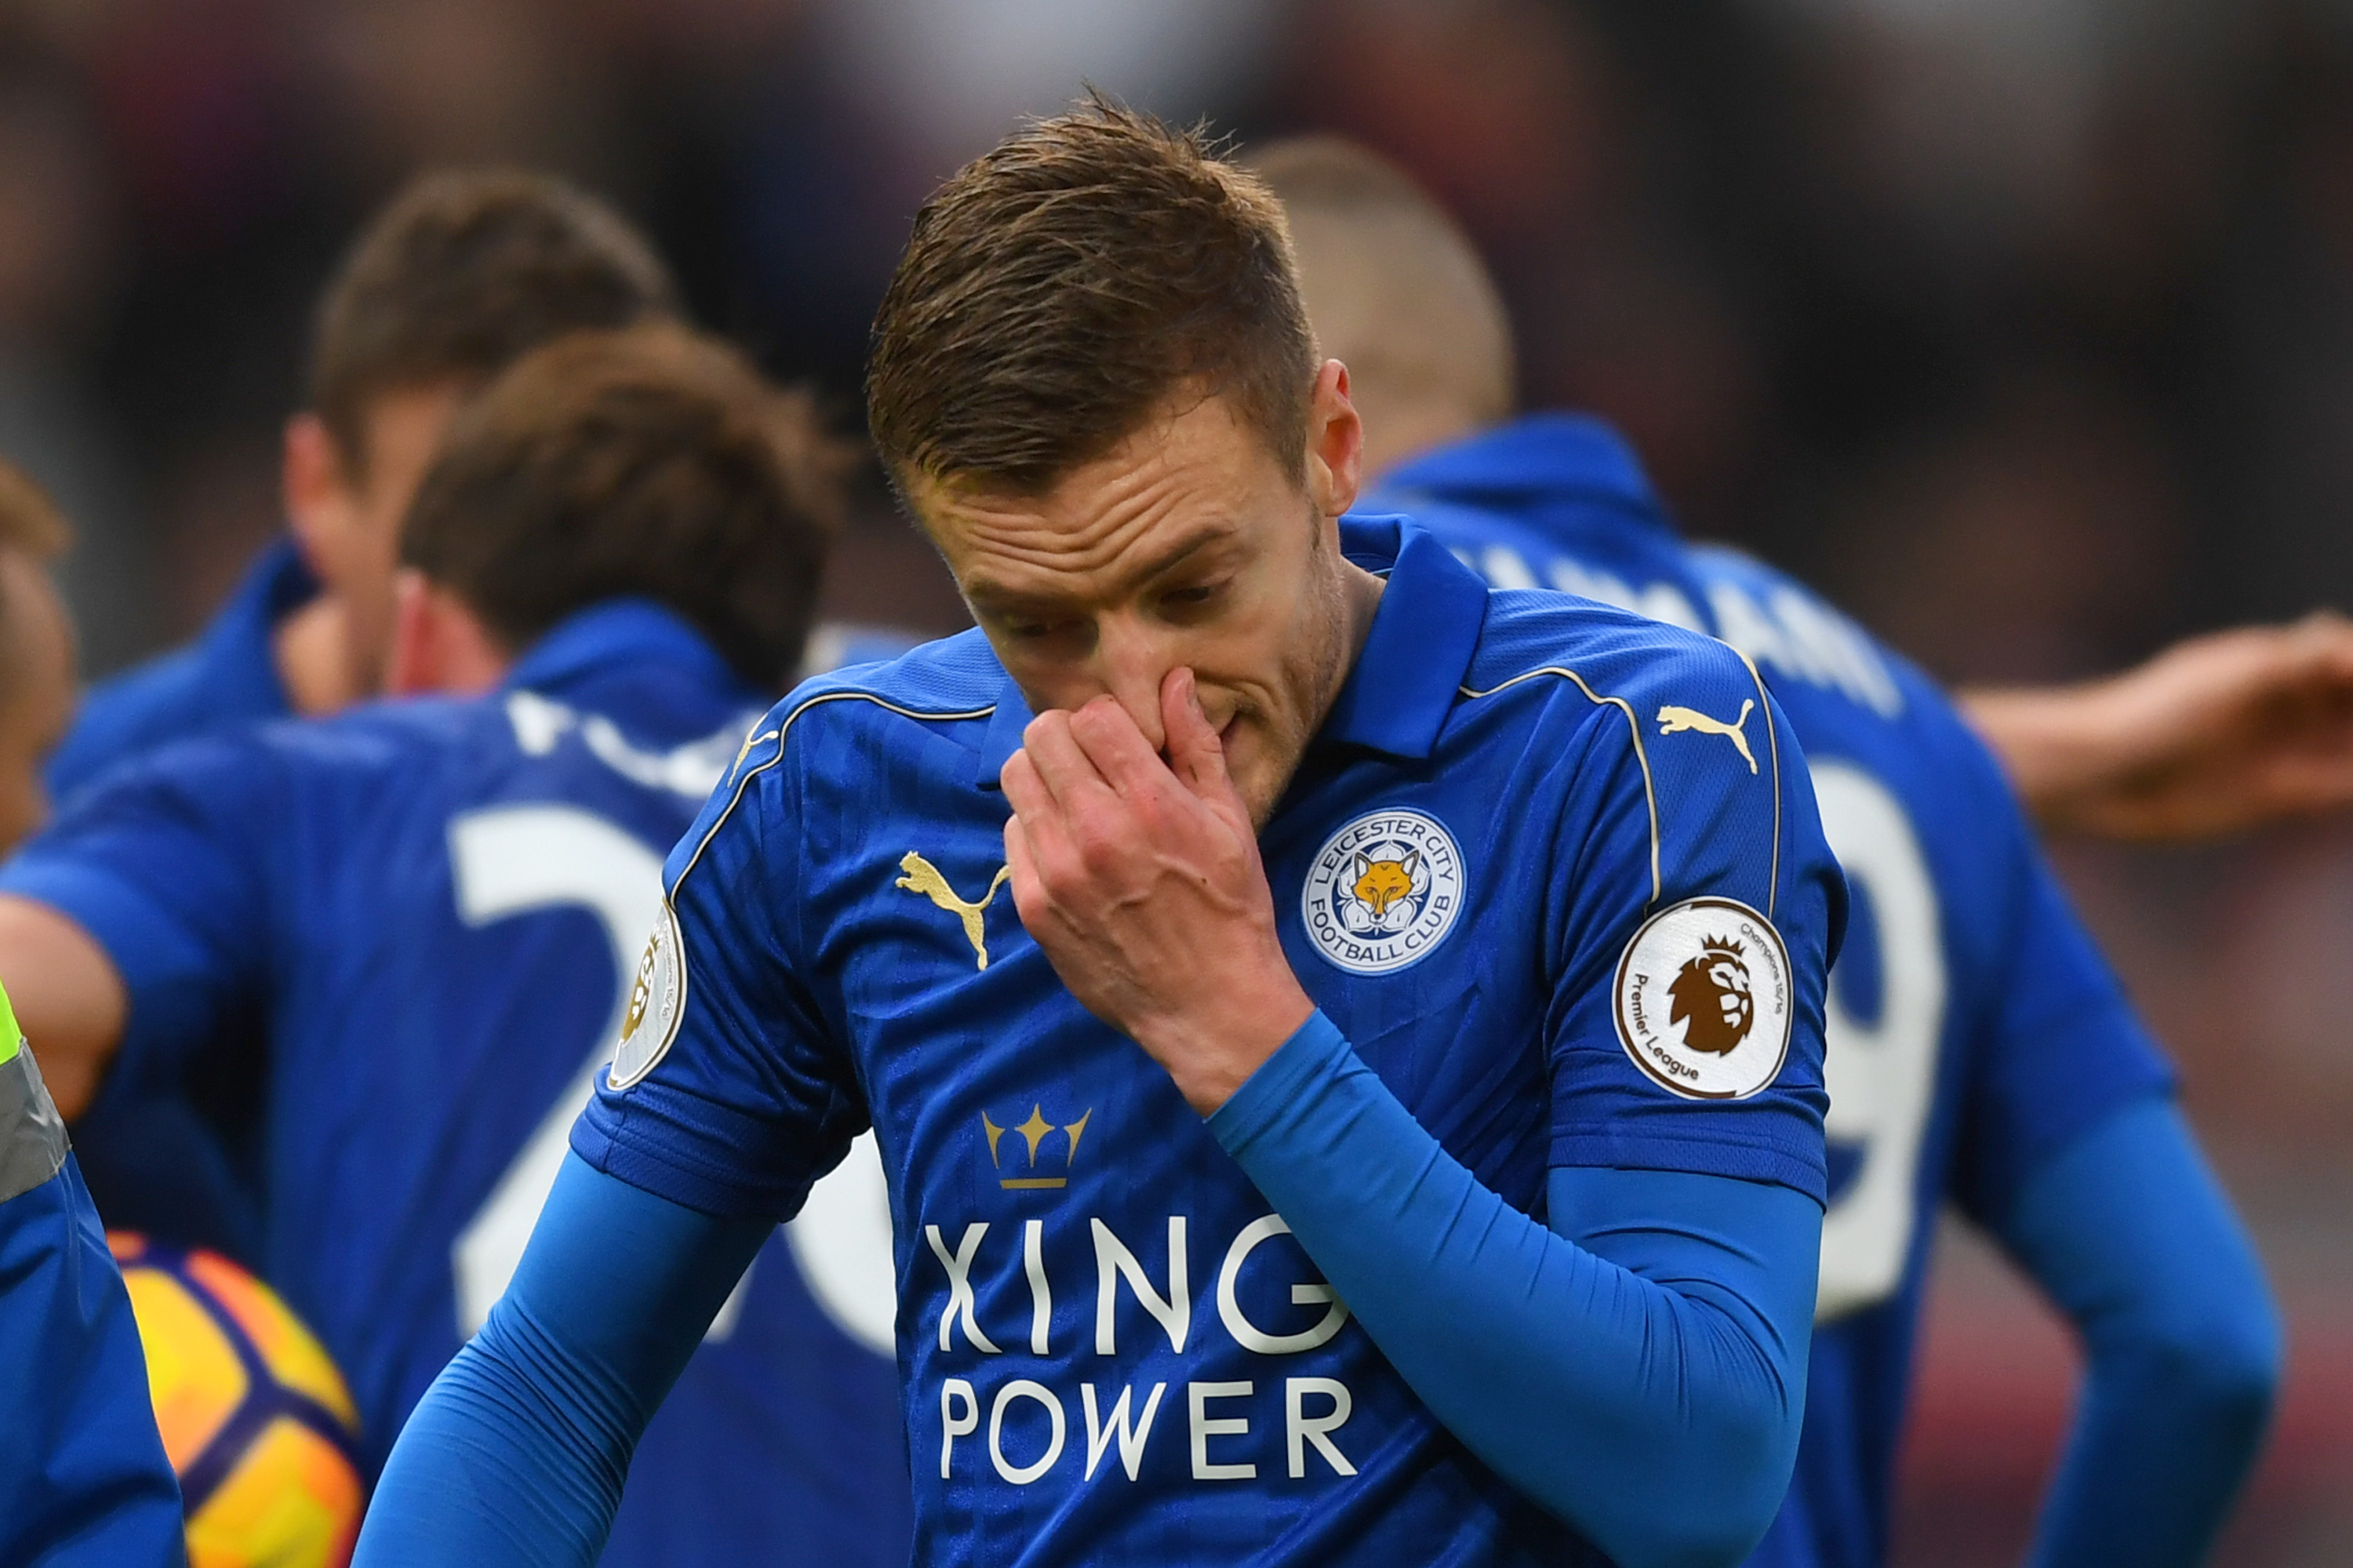 From the highs of last season to the struggles of this, Jamie Vardy looks a pale shadow of the player who took Premier League by storm in 2015/16. (Photo courtesy - Michael Regan/Getty Images)